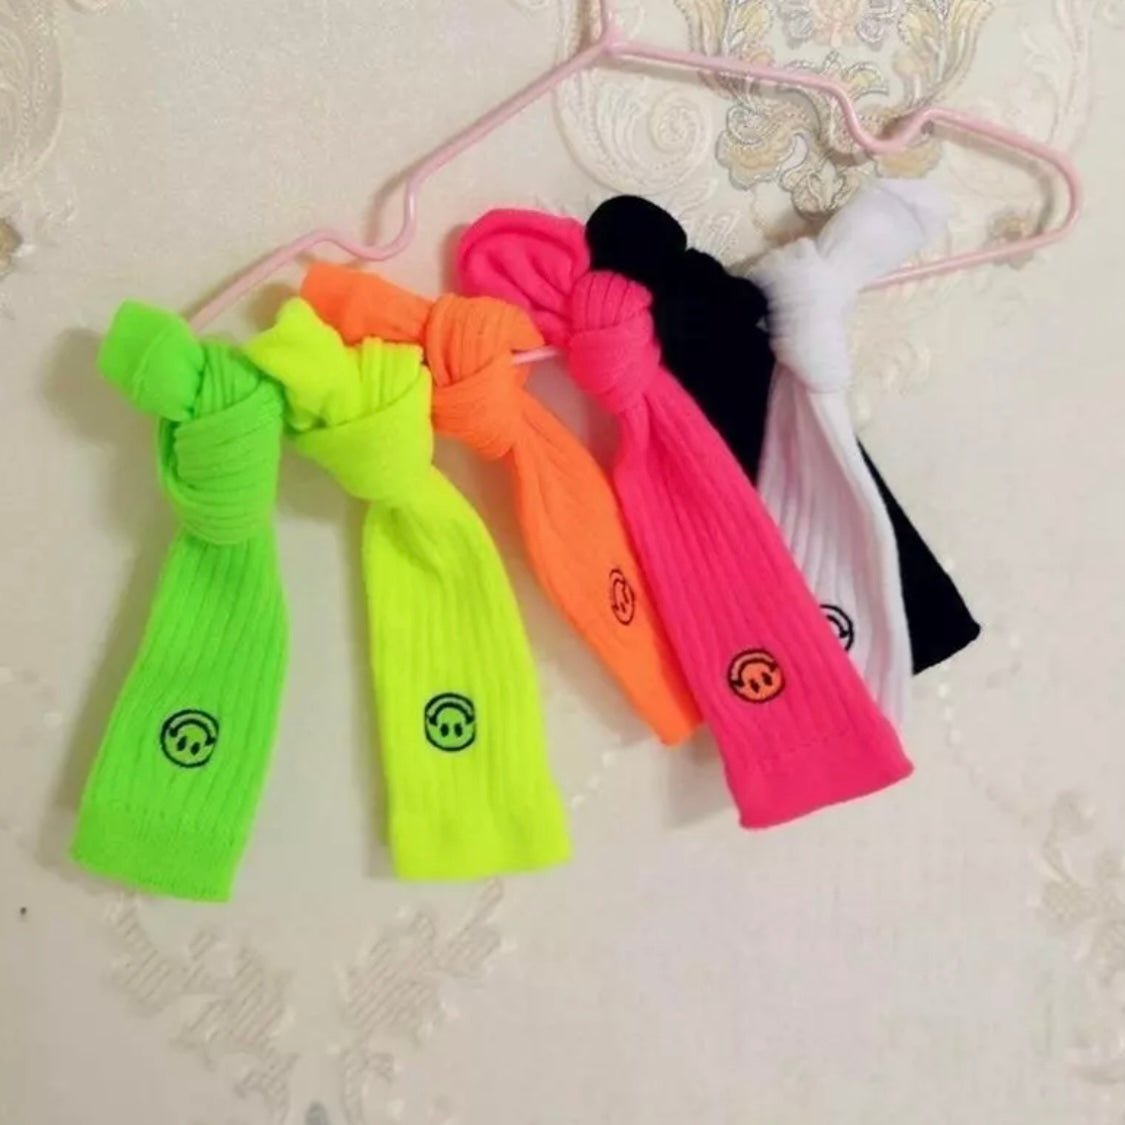 Smile Socks - Mommy & me find Stylish Fashion for Little People- at Little Foxx Concept Store